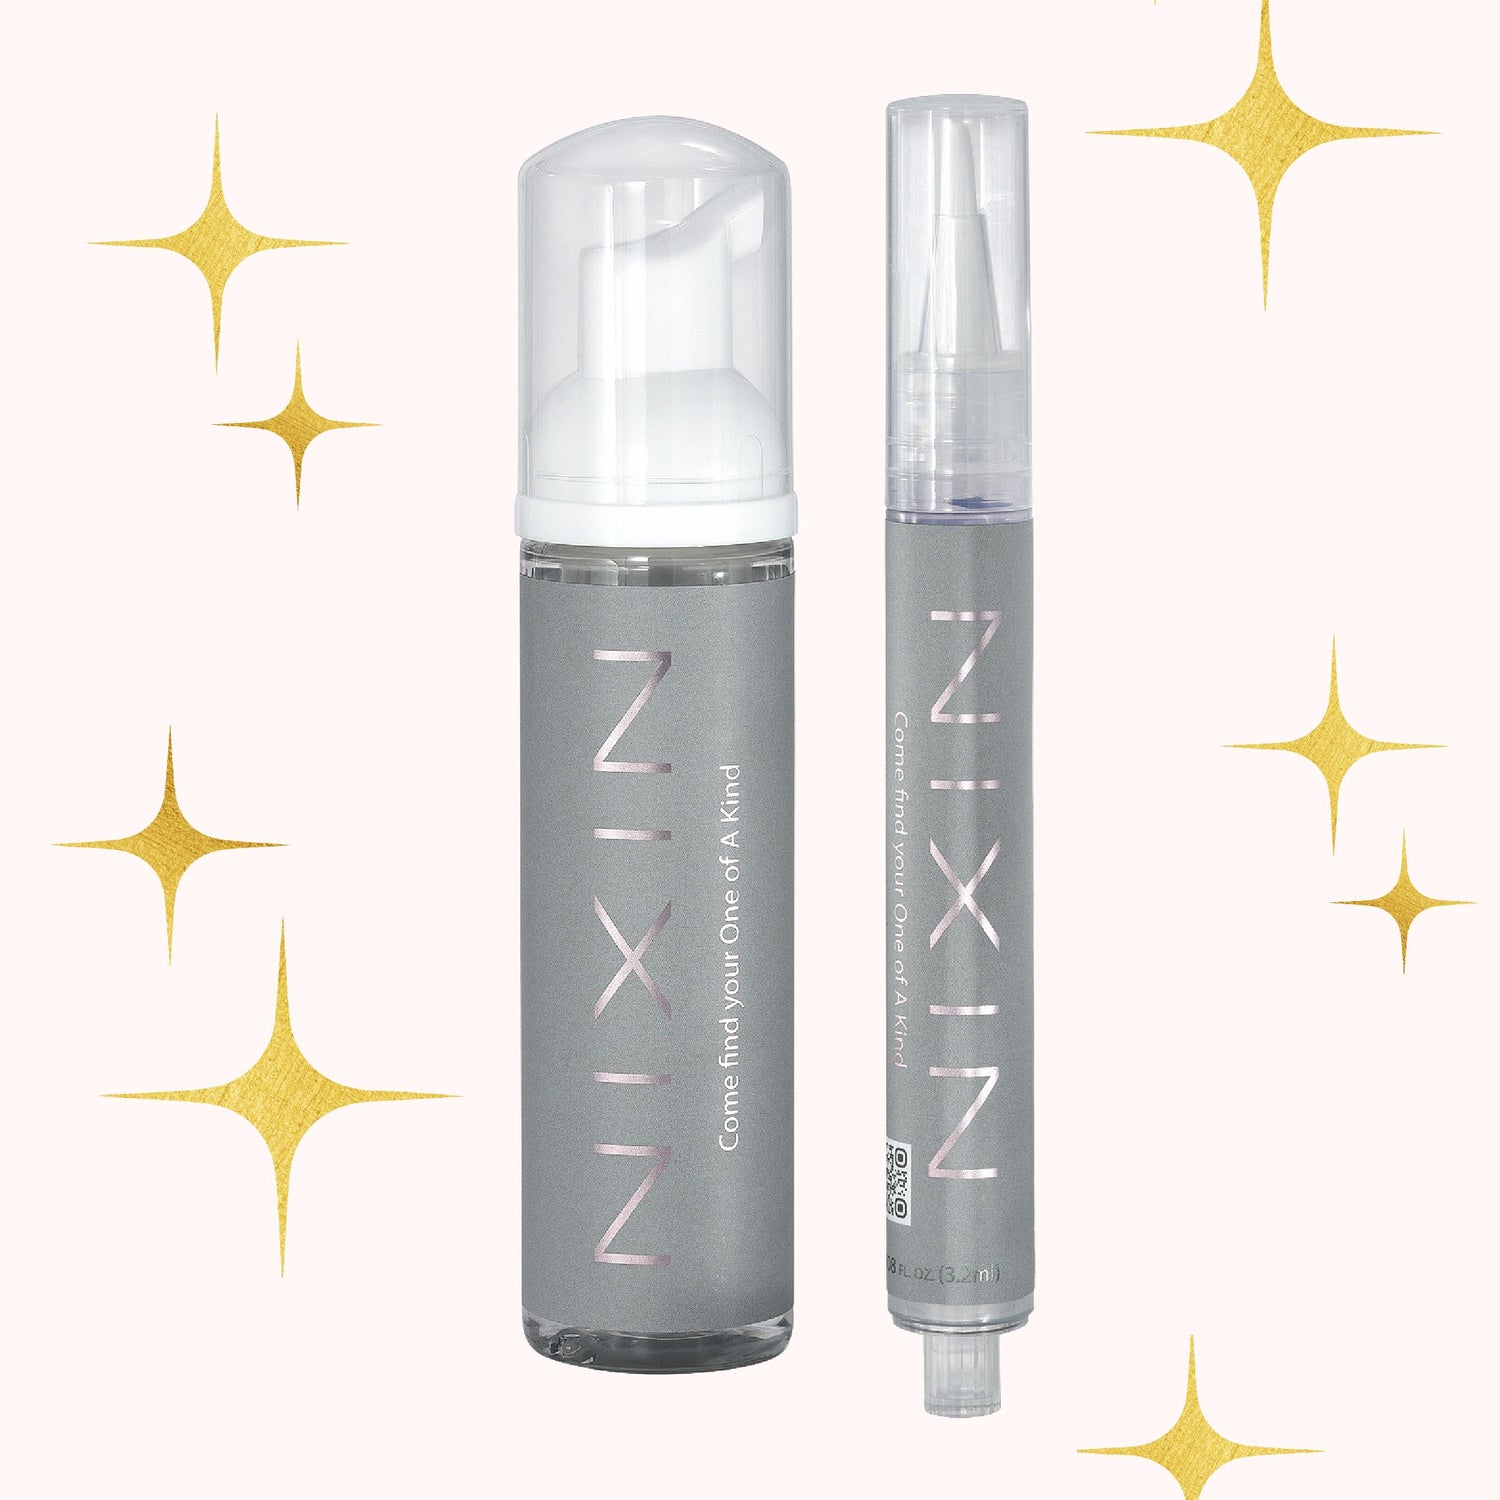 NIXIN Jewelry Cleaner that can be used to clean jewelry at home or on the go. Safe for cleaning opal jewelry.